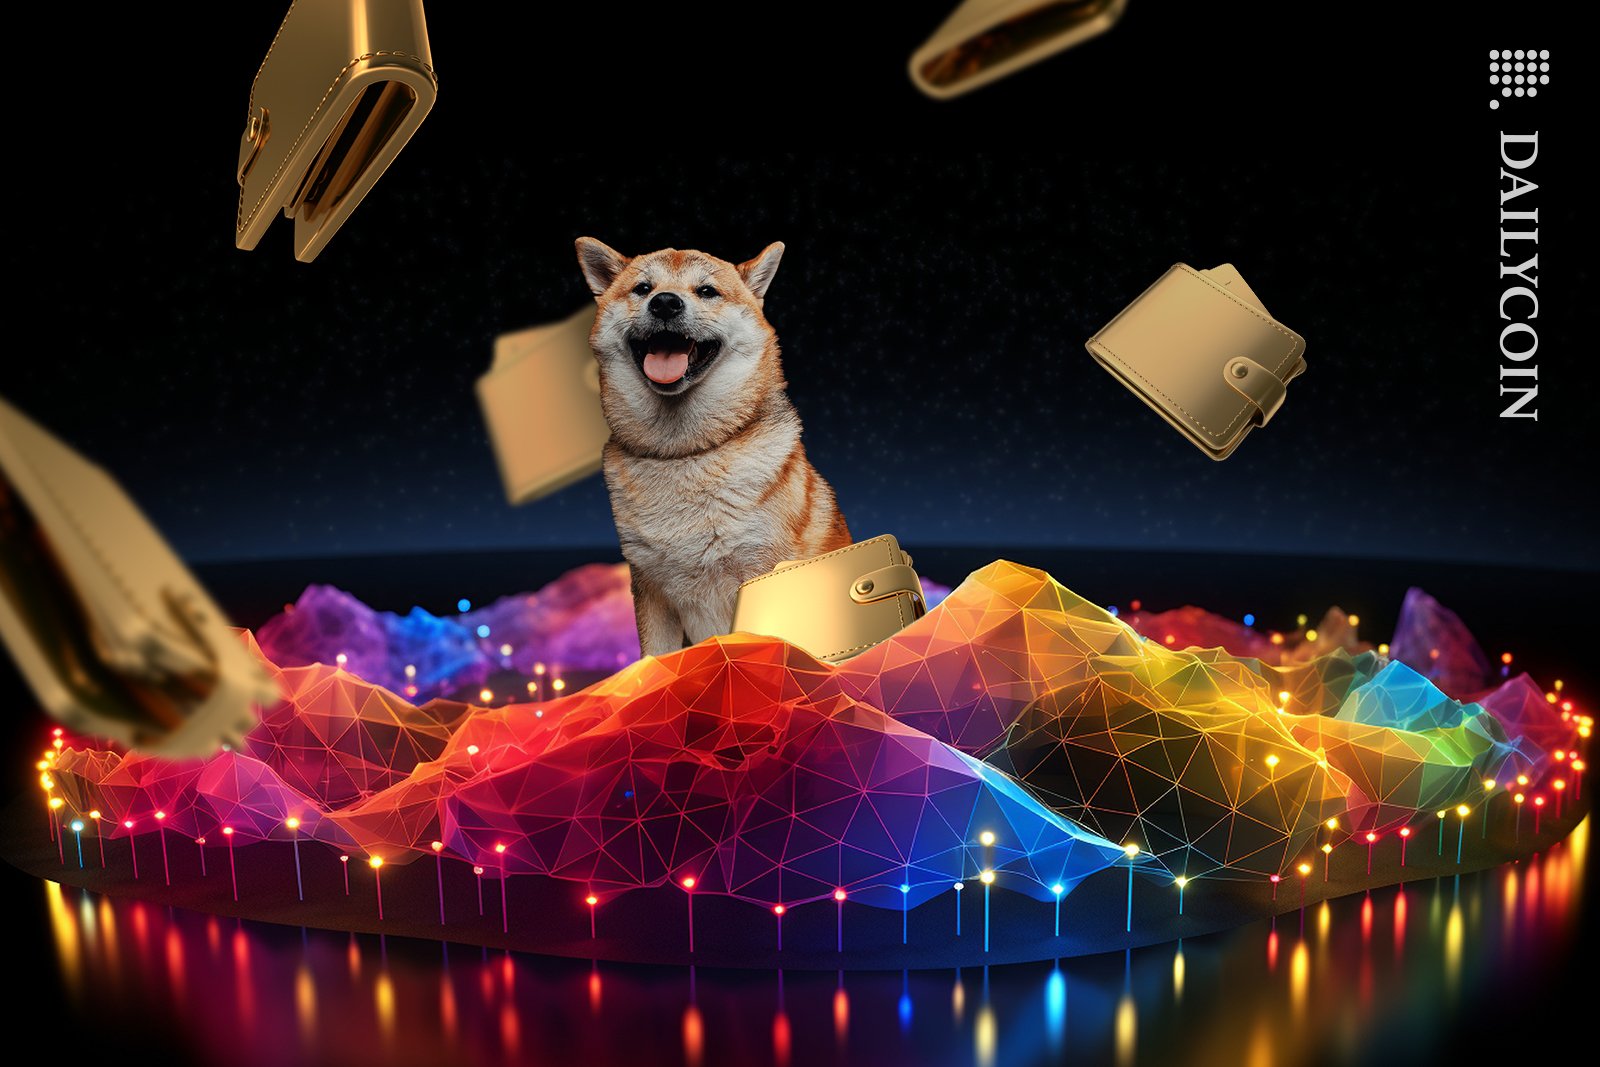 Shiba inu on DEFI land with gold wallets in the air.